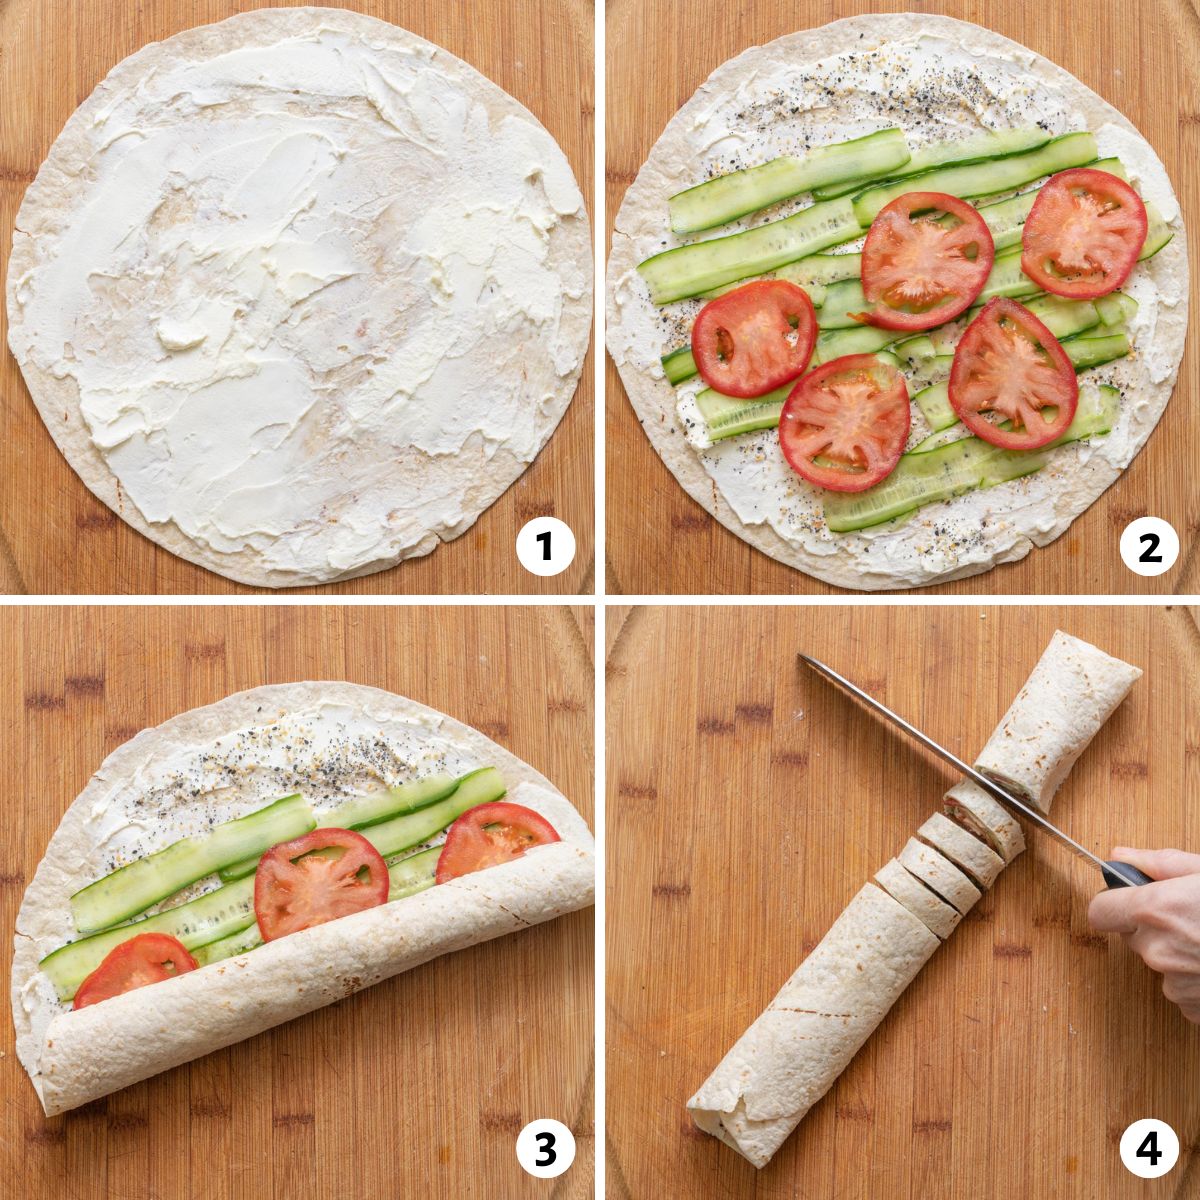 4 image collage on how to make a pinwheel sandwich recipe: spread cream cheese, add tomato and cucumber, roll tortilla shell, slice into thin rings.